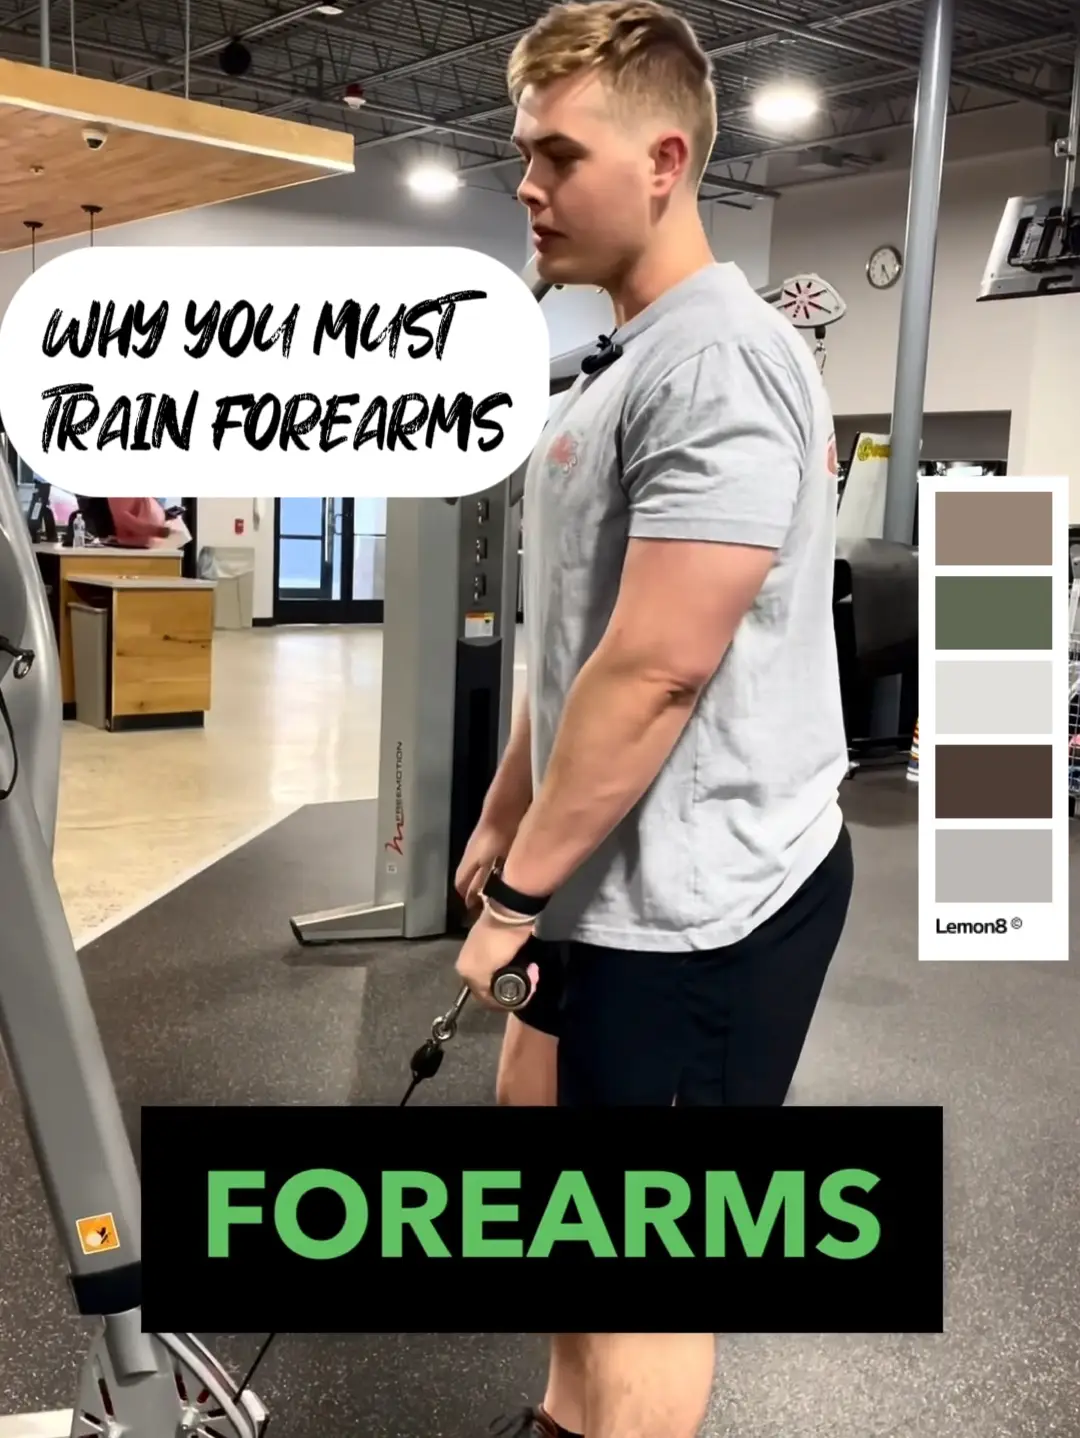 Keep Training Your FOREARMS 💪🏼, Video published by Michael Labs